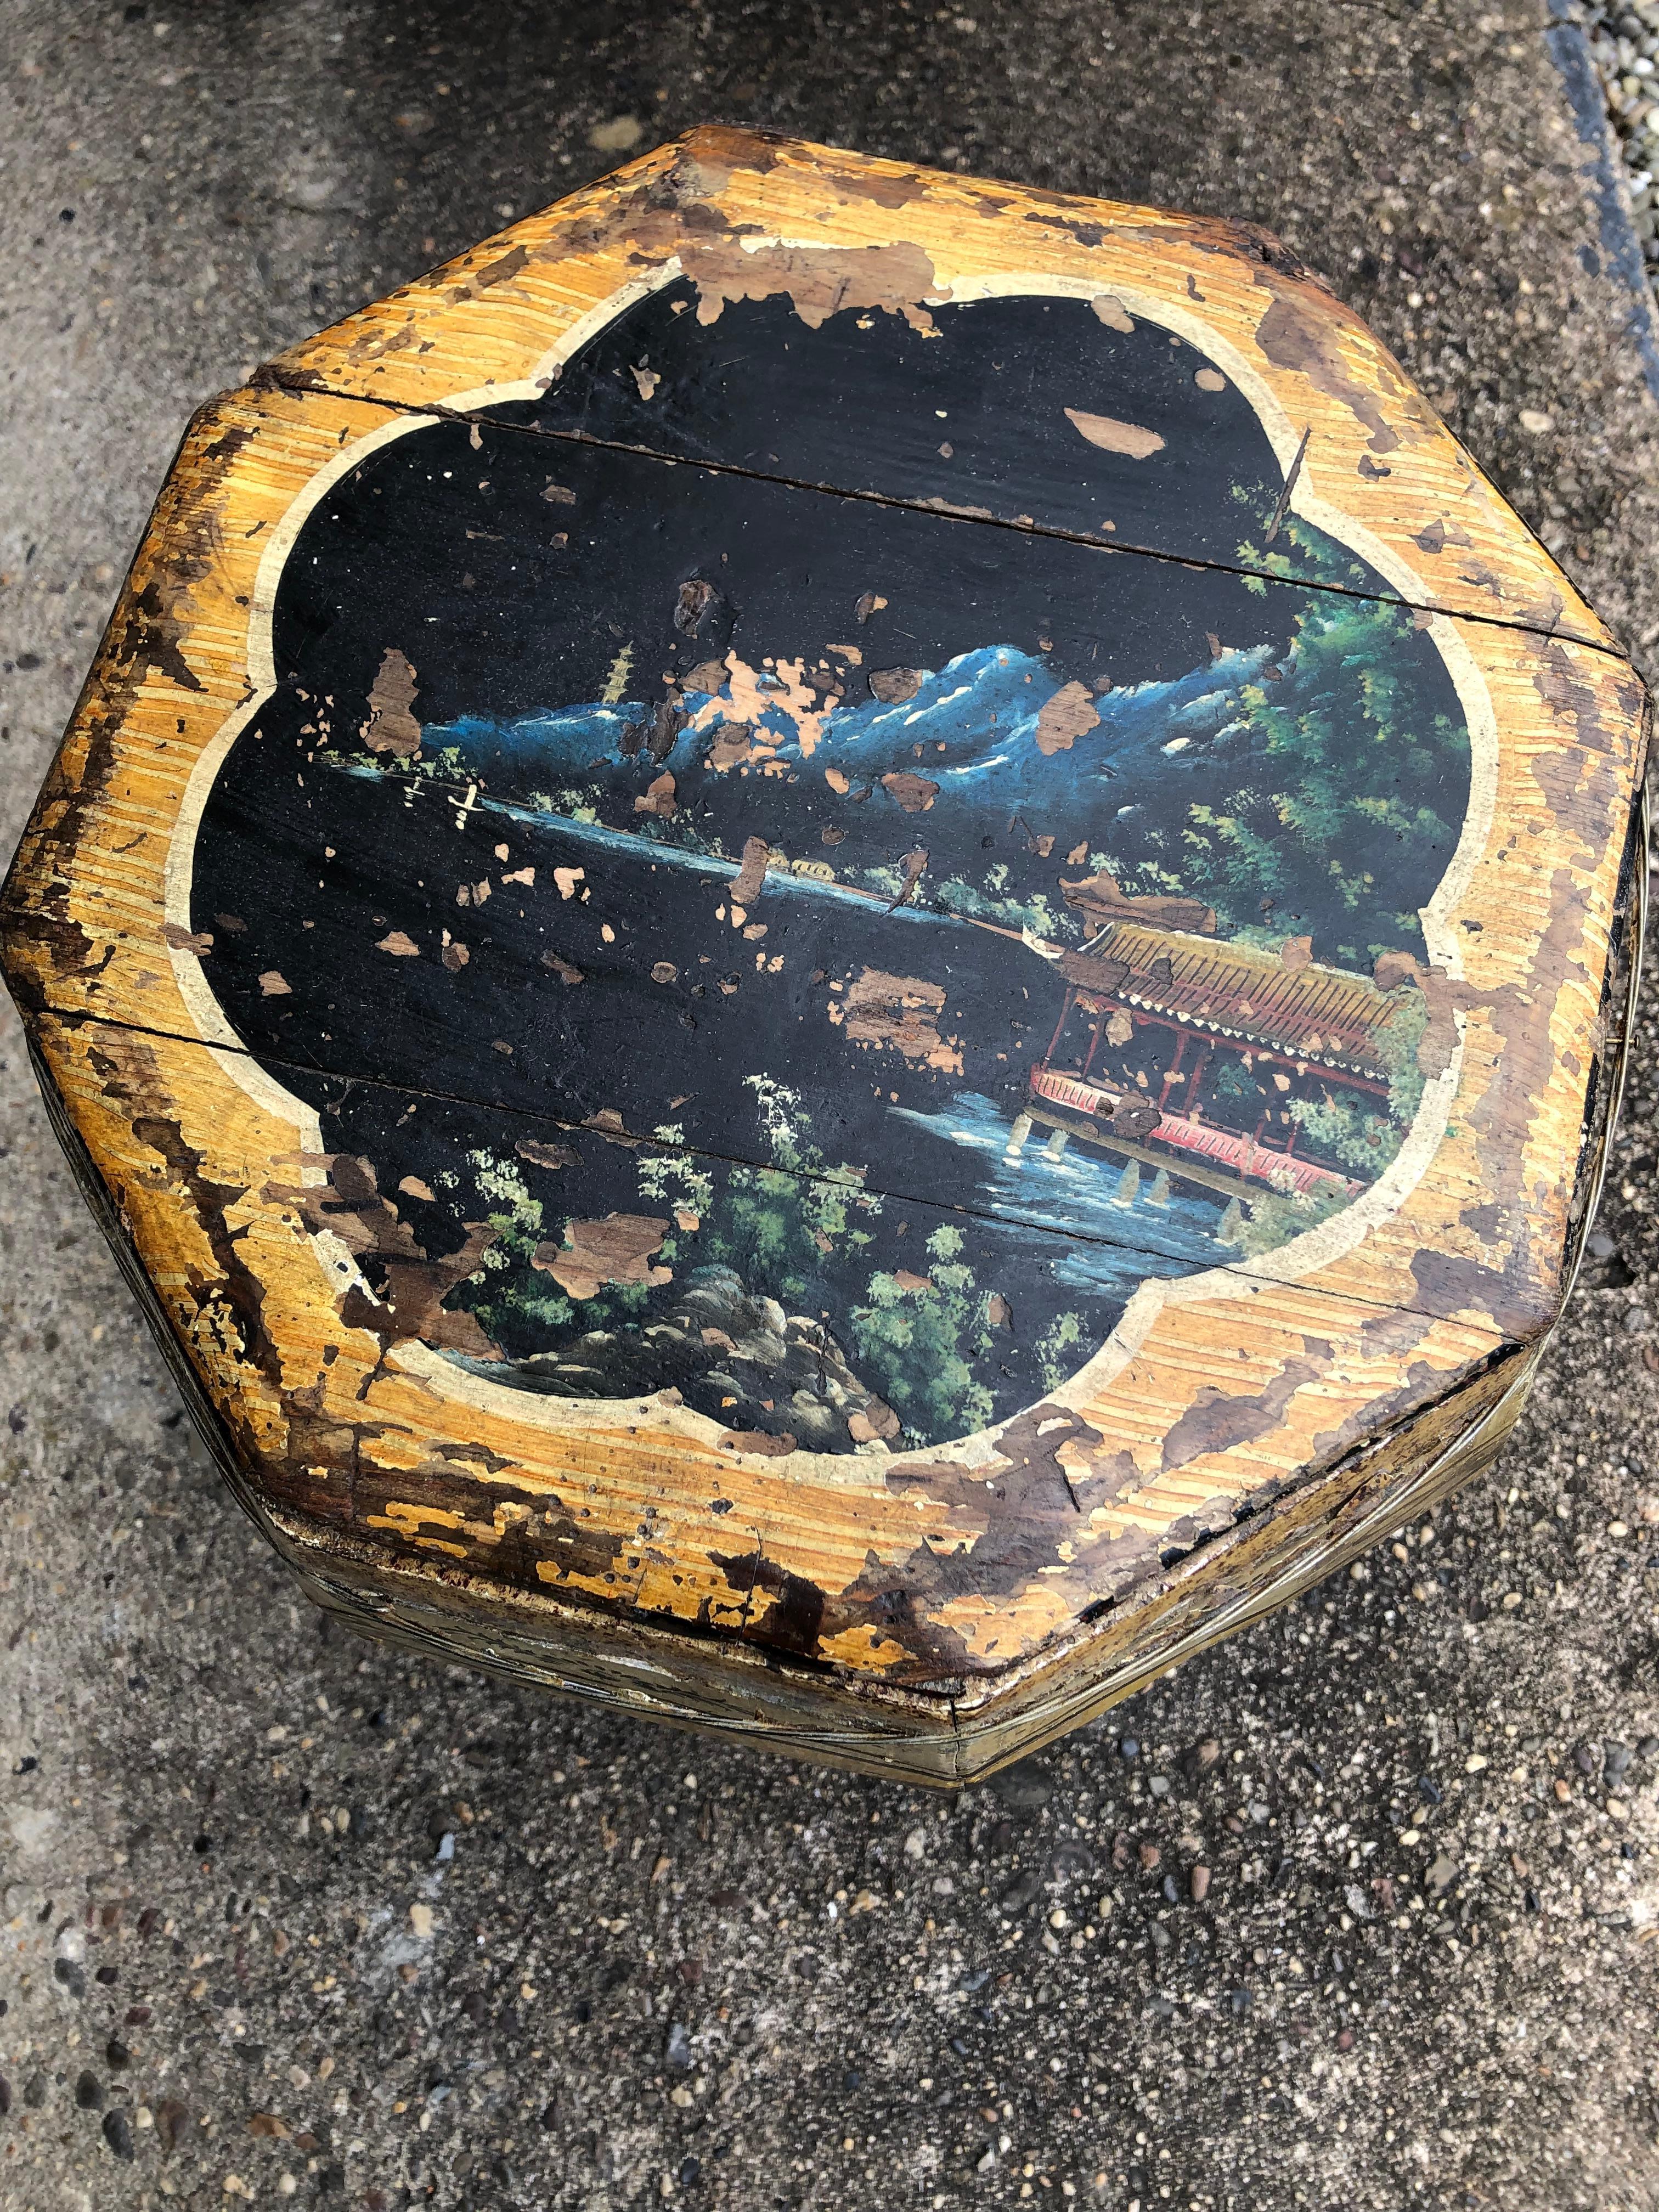 Charming and one of a kind hand painted antique wooden rice bin that makes a wonderful end table. The rustic piece has lovely folk art primitive paintings of swans, birds, and foliage with a yellow and black background. Top comes off and the